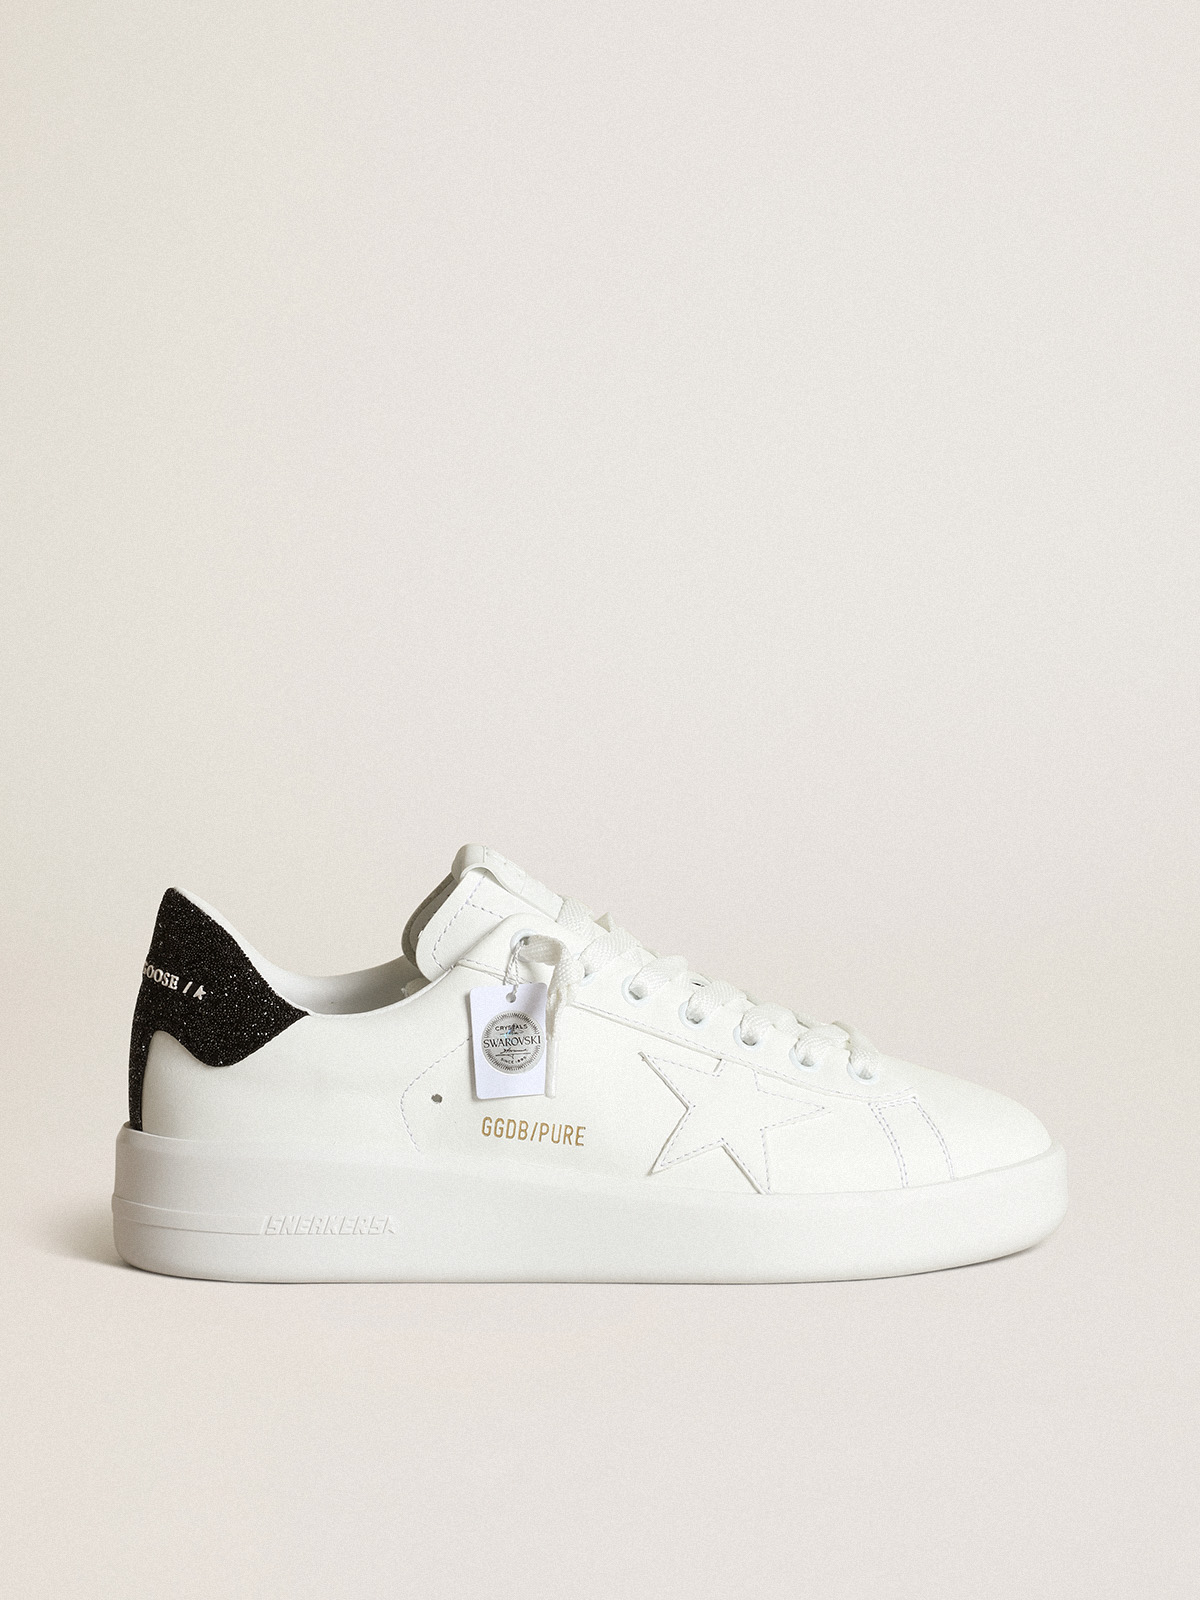 Purestar in white leather with tone-on-tone star and heel tab in black  Swarovski crystals | Golden Goose